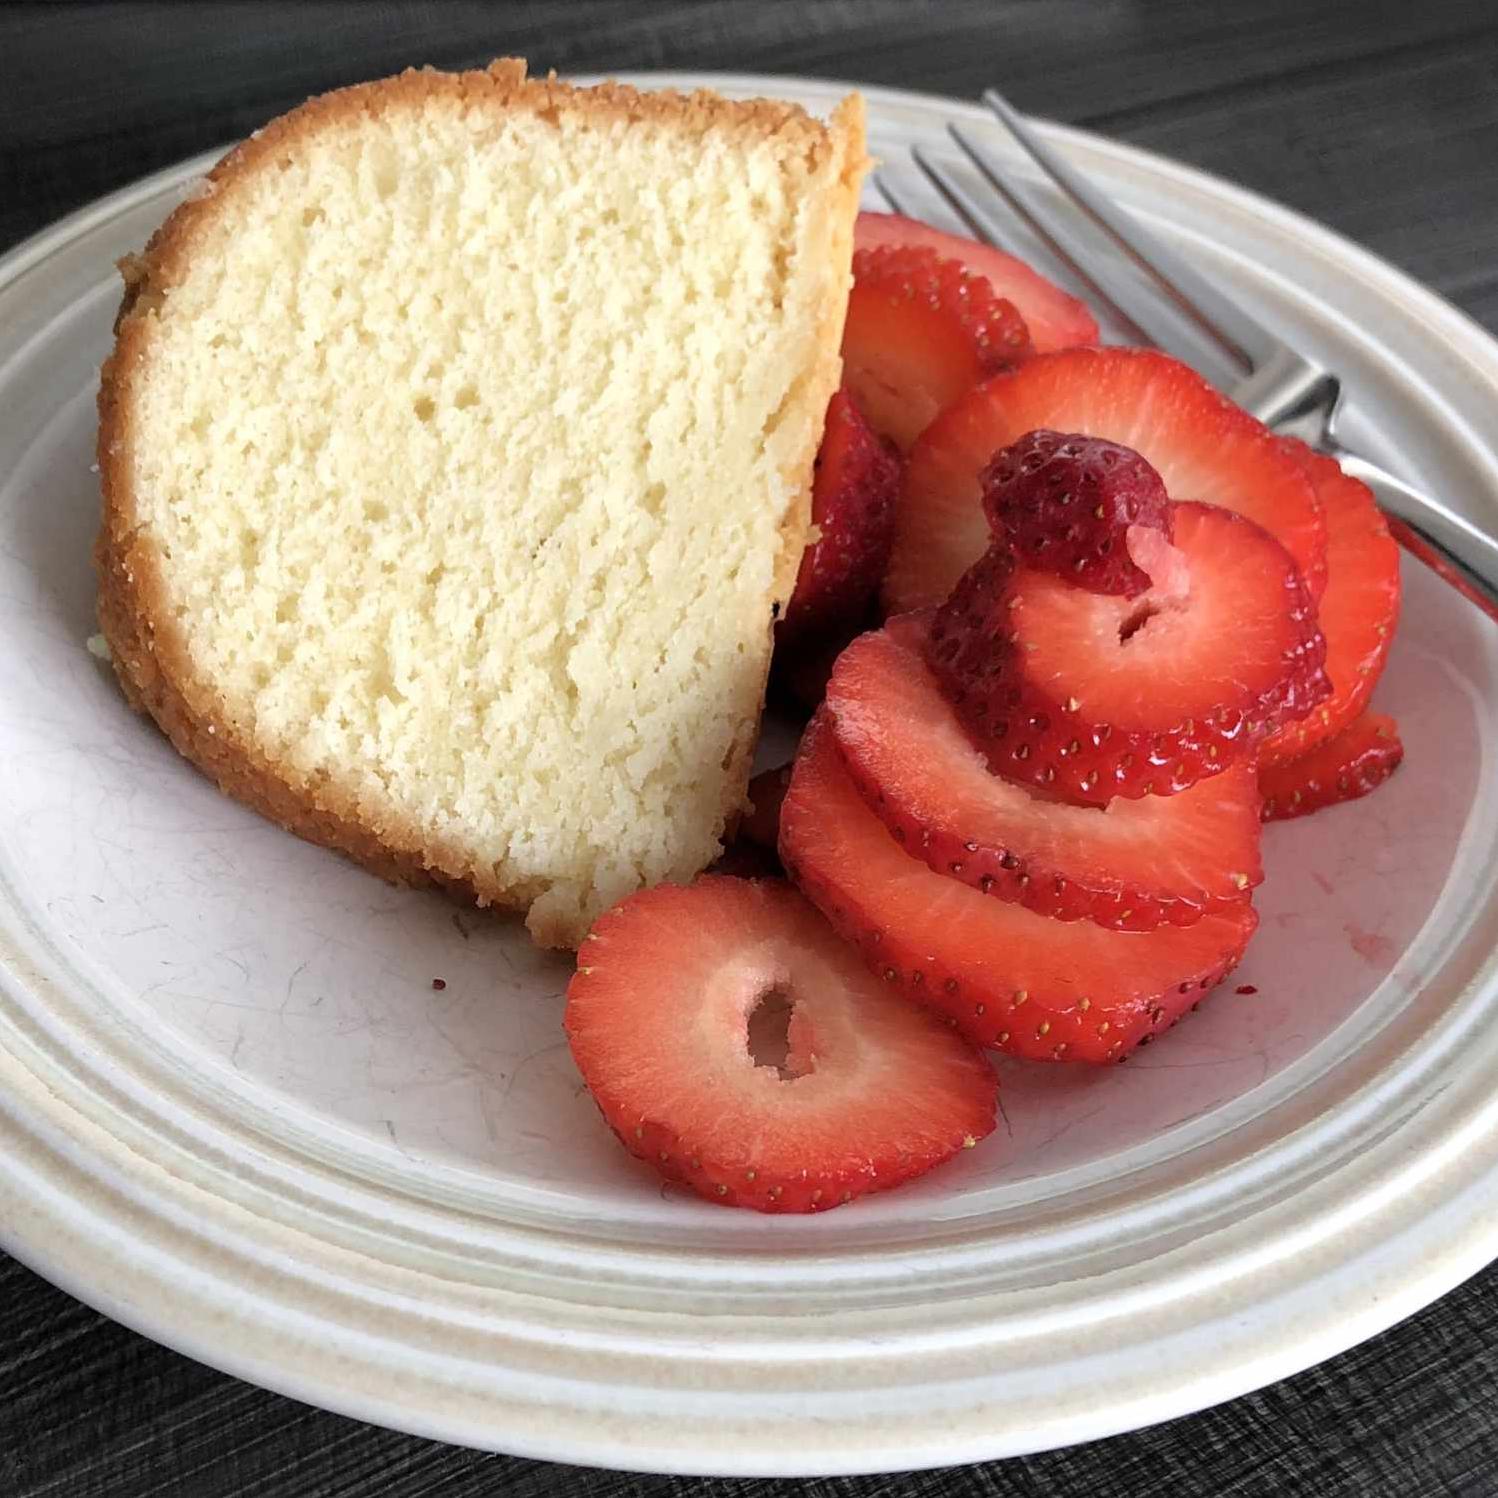  This pound cake will melt in your mouth!